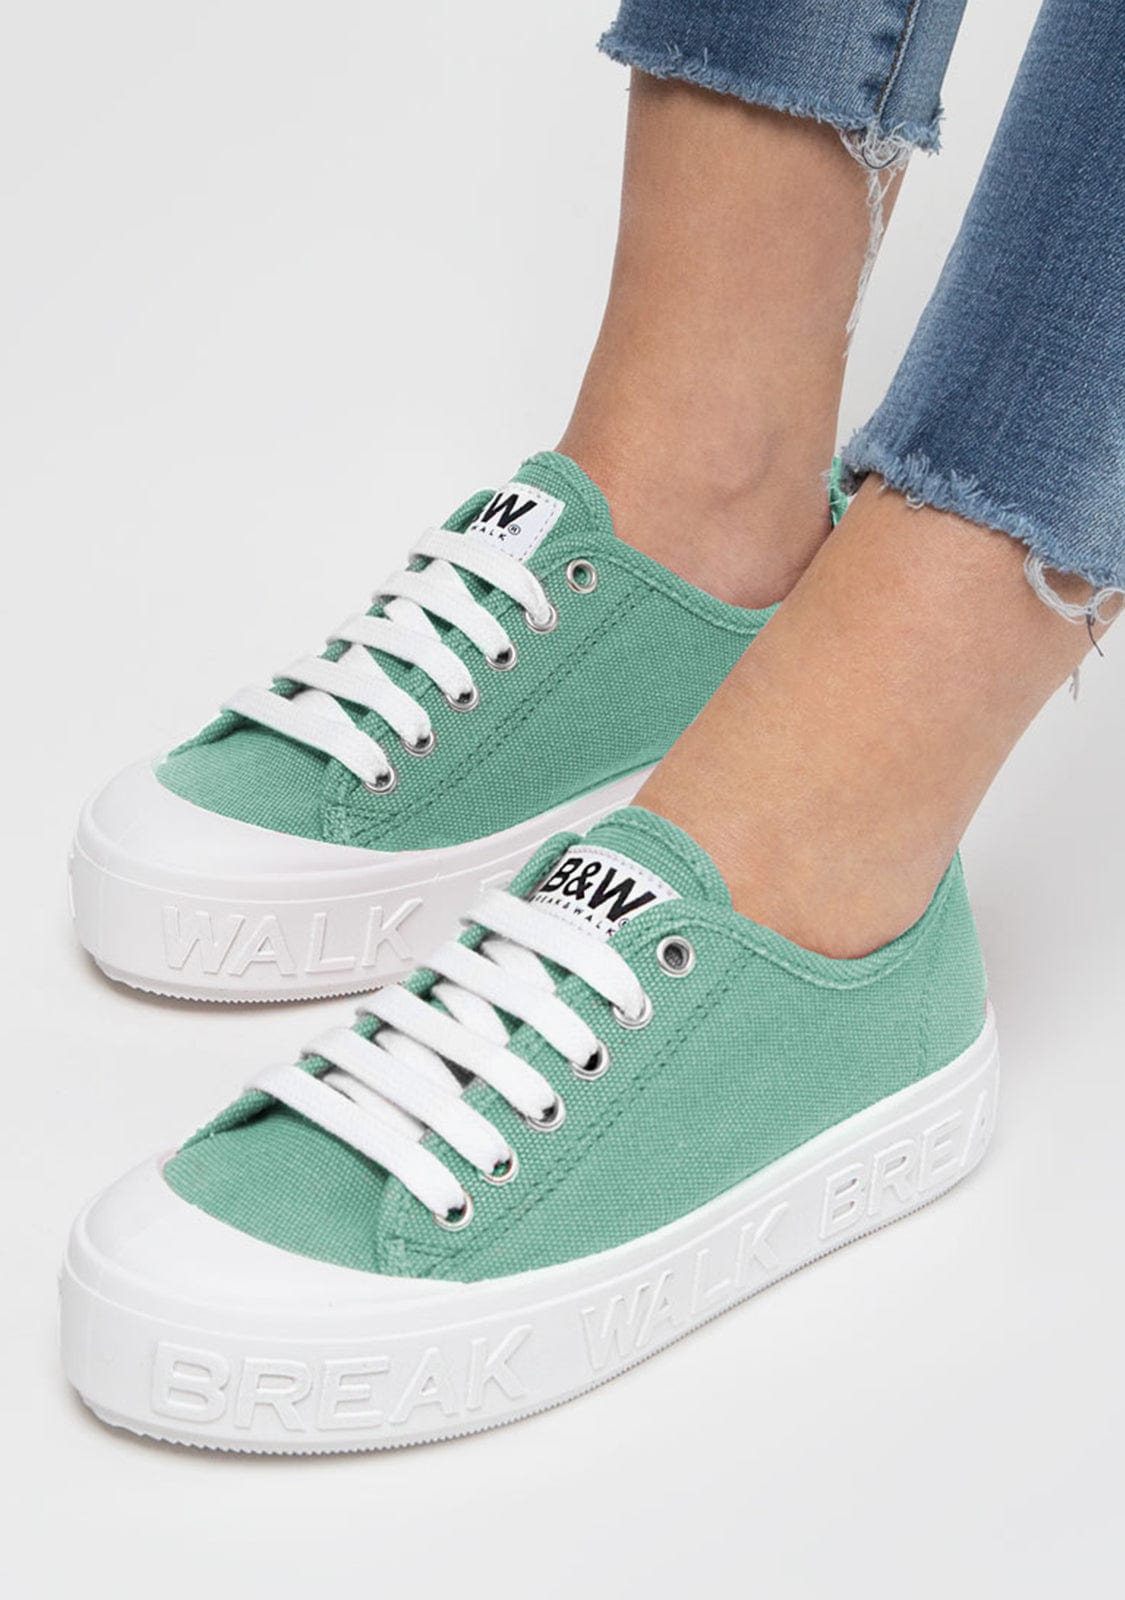 Sneakers Wicker Turquoise